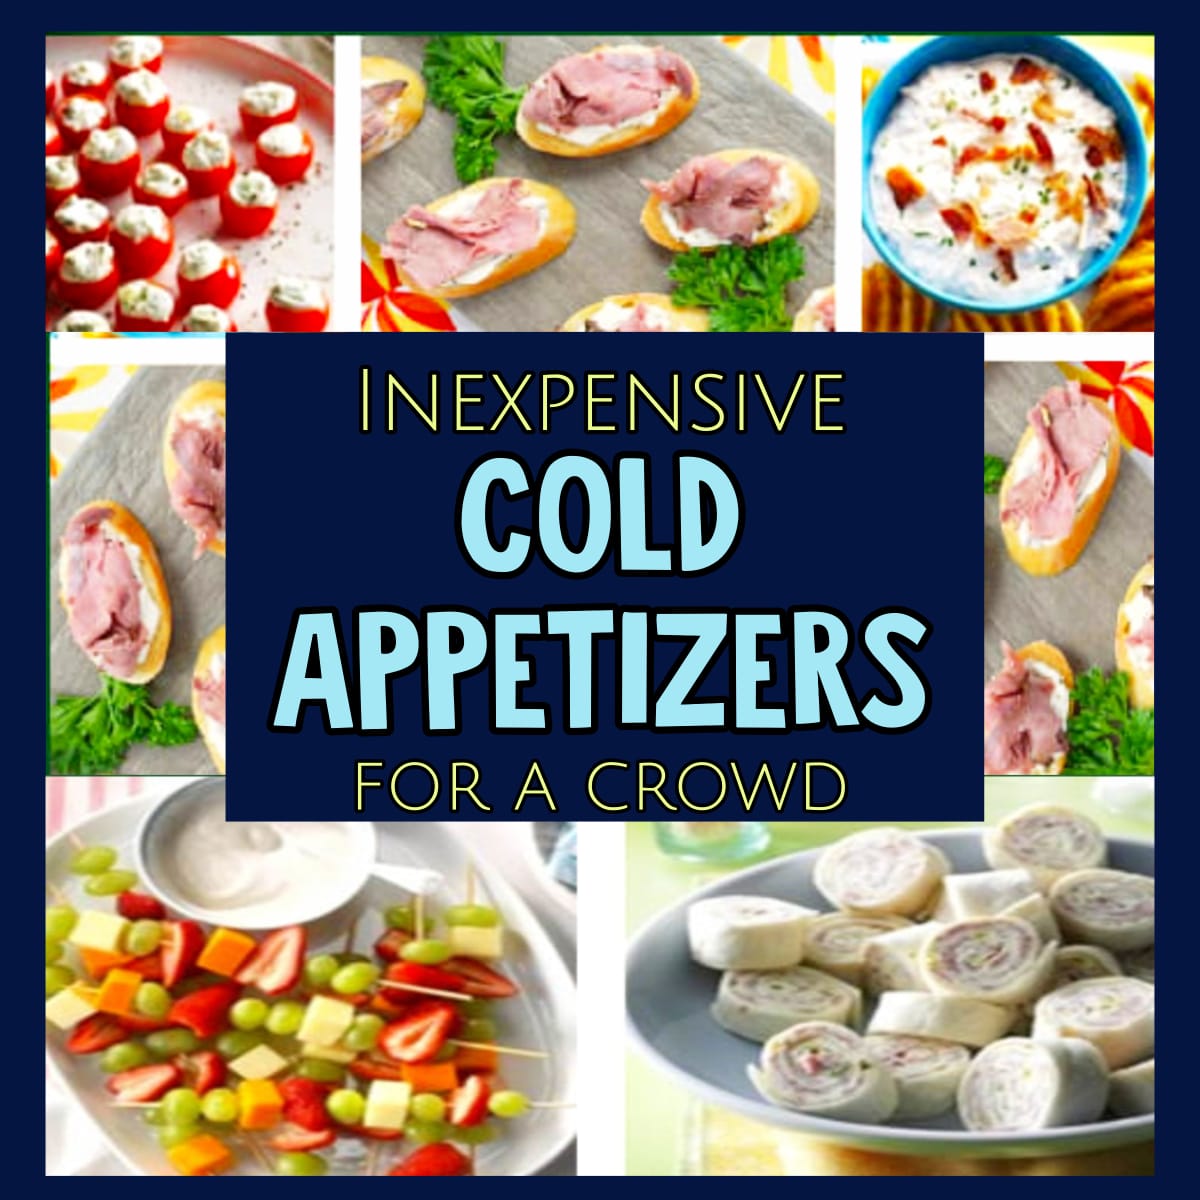 inexpensive cold appetizers for a crowd  3-ingredient cold appetizers and finger foods including toothpick appetizers for party food on a stick or skewer - quick make ahead hors d'oeuvres ideas too